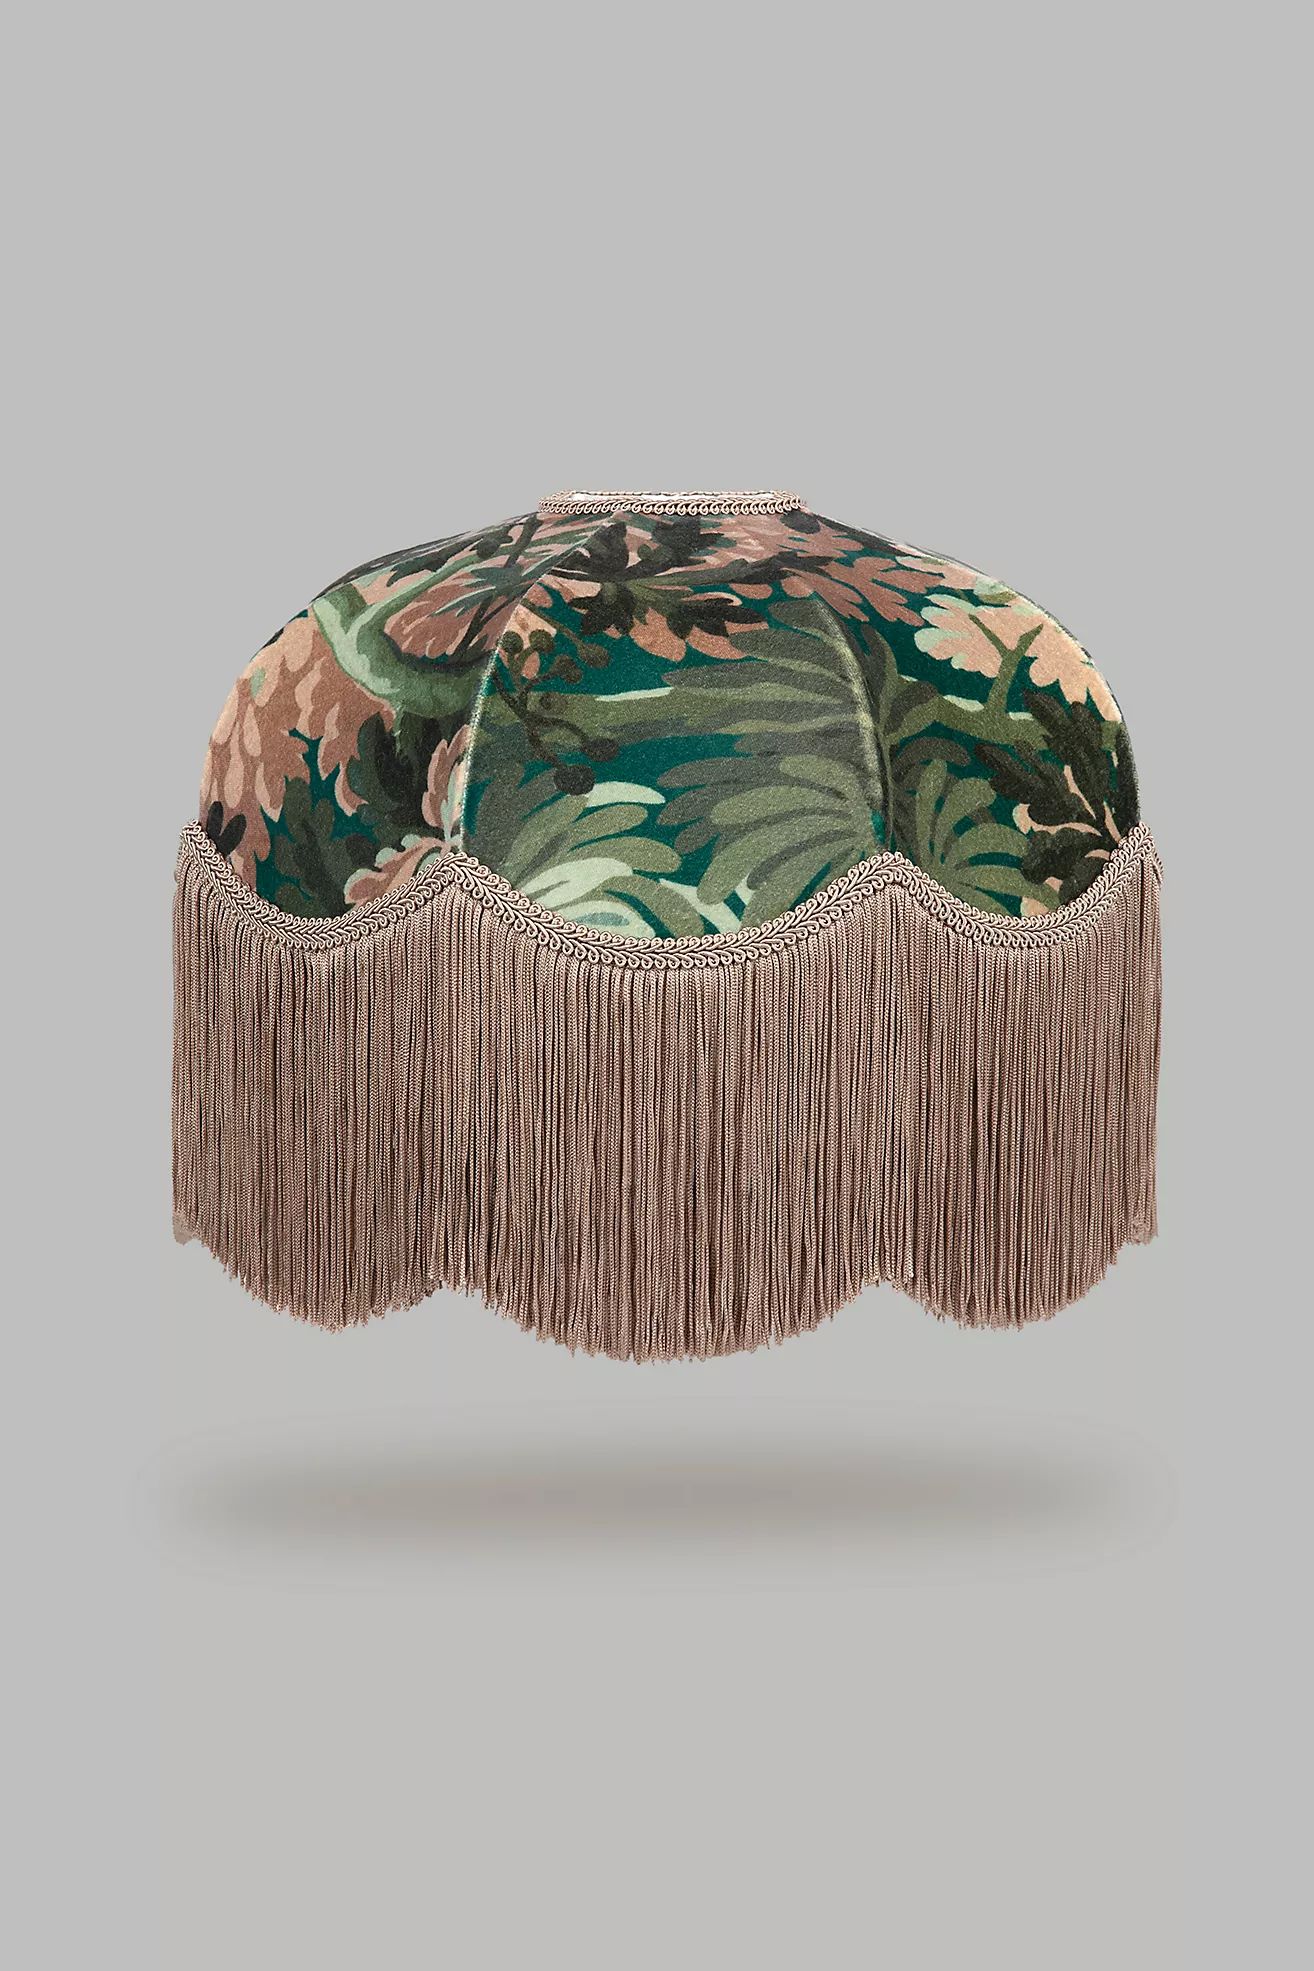 House of Hackney Foris Lampshade | Anthropologie (US)